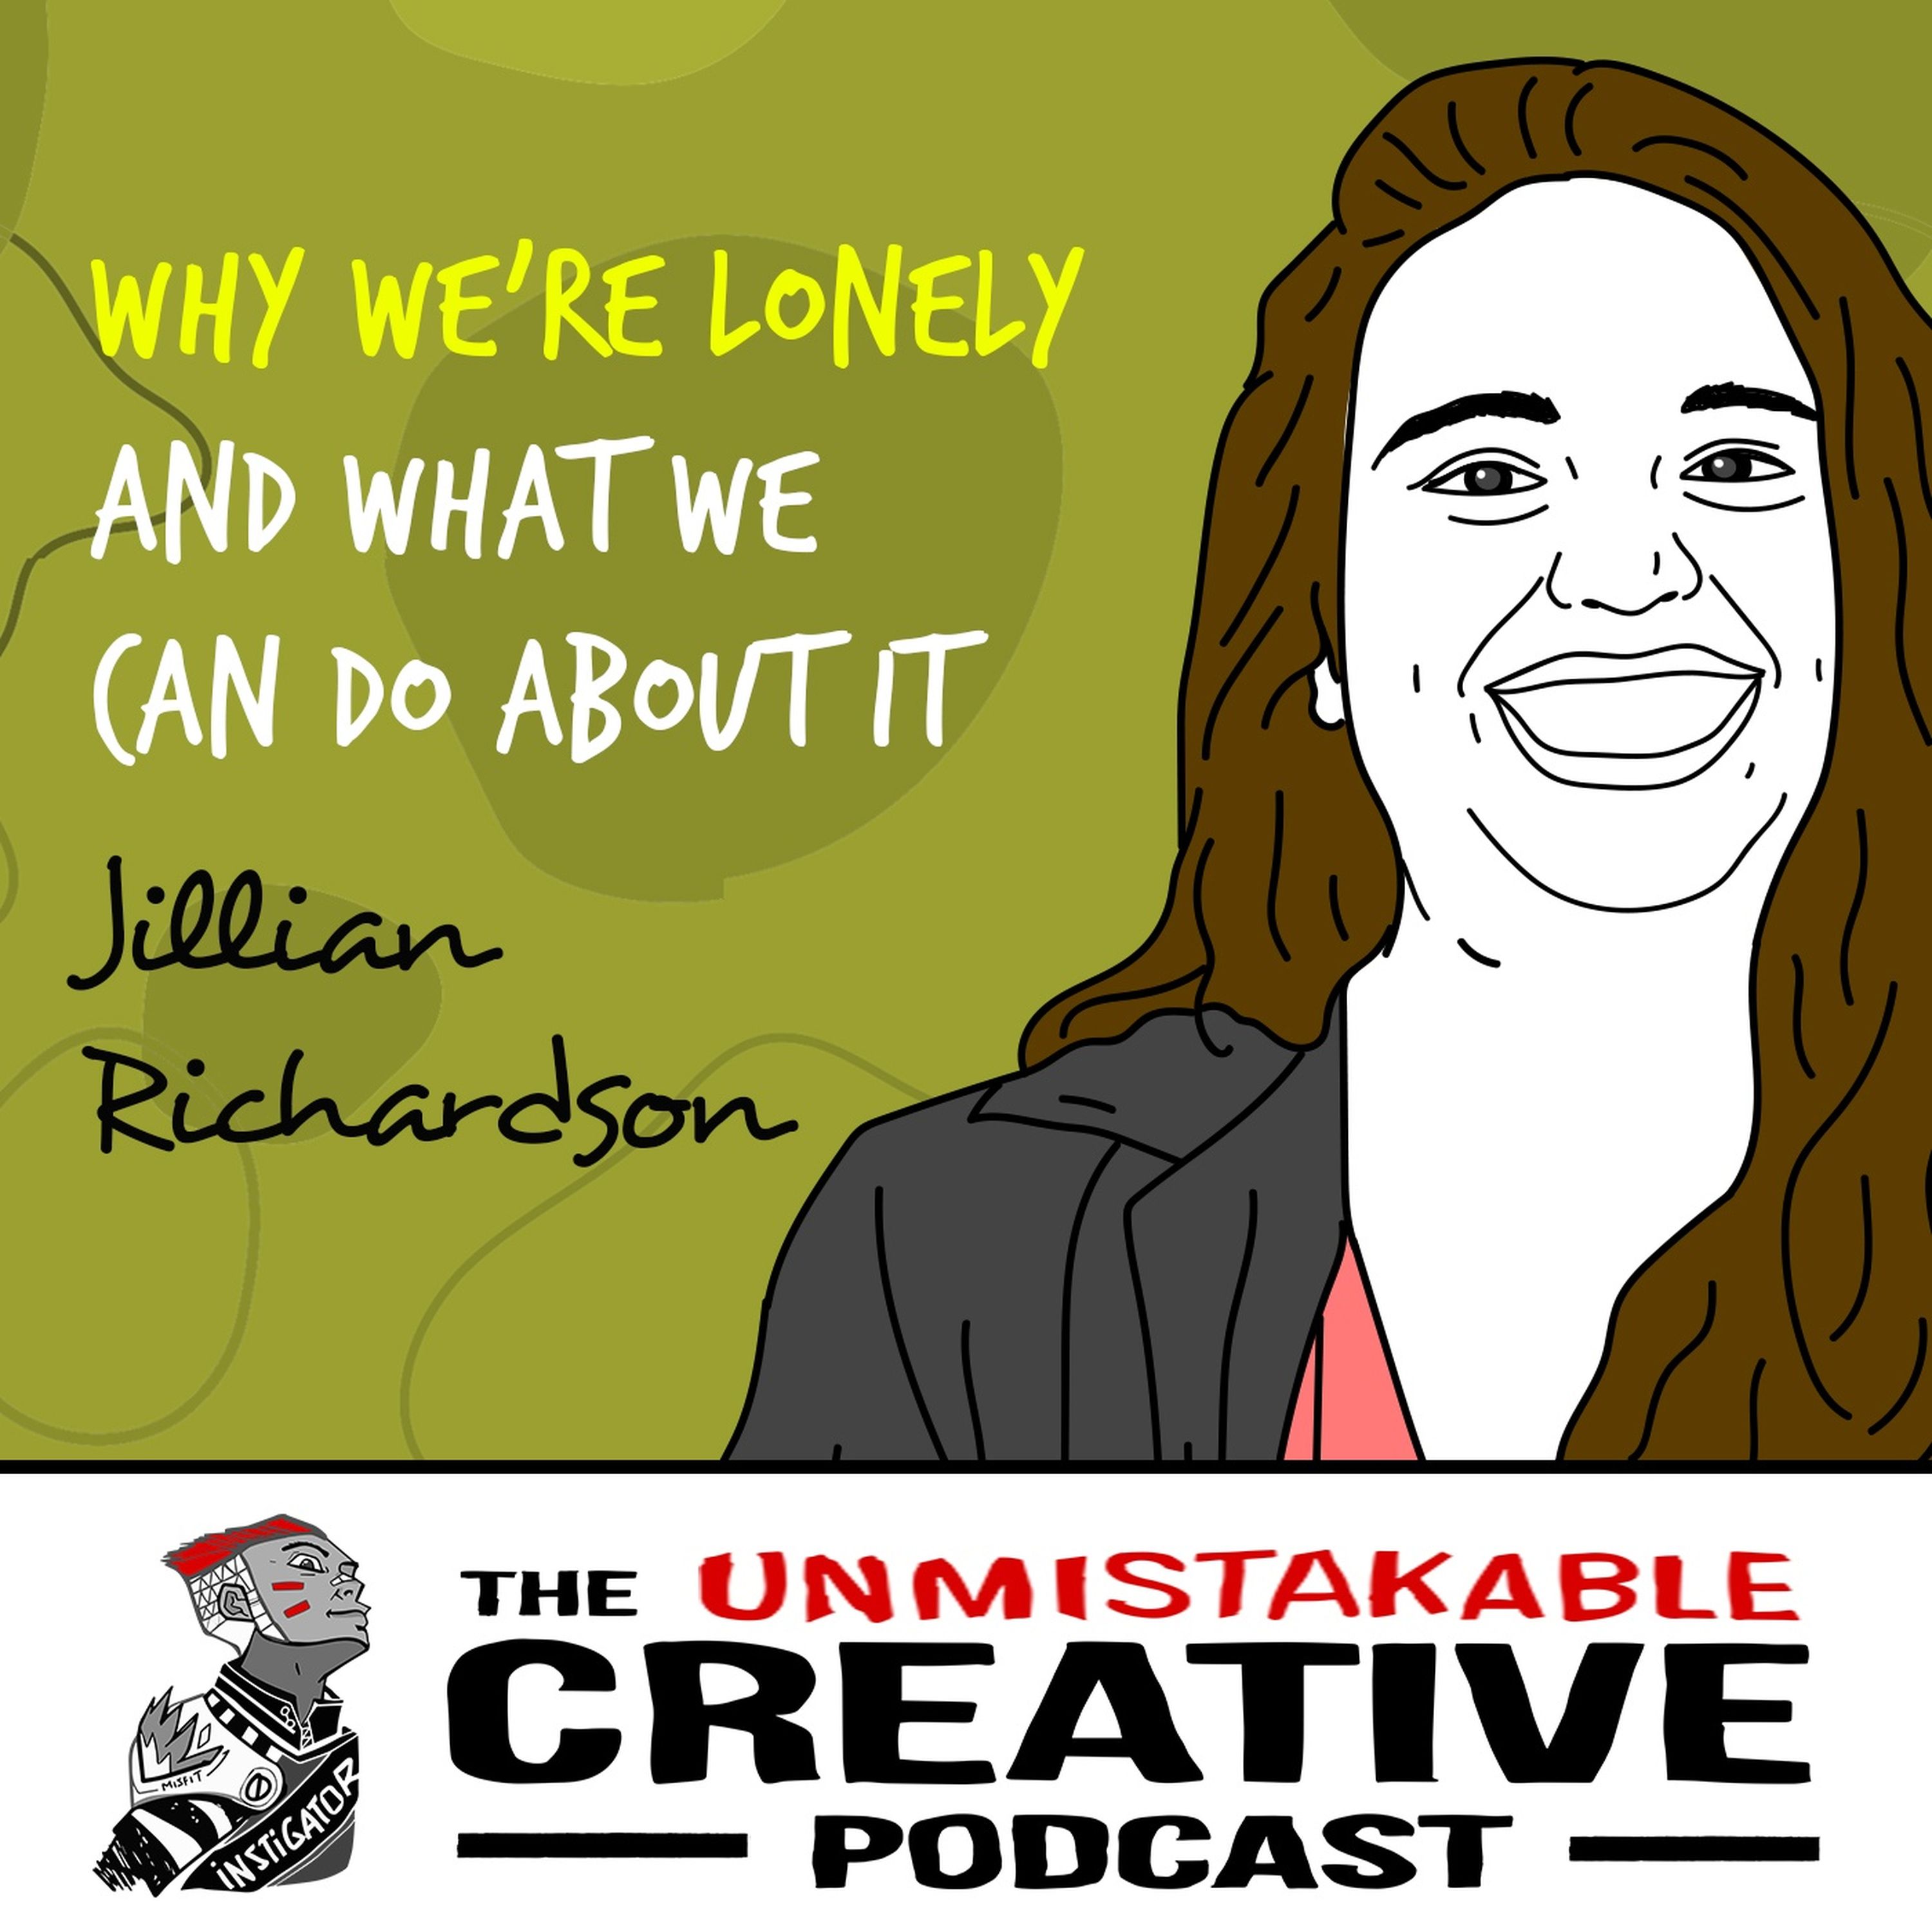 Jillian Richardson: Why We're Lonely and What We Can do About It